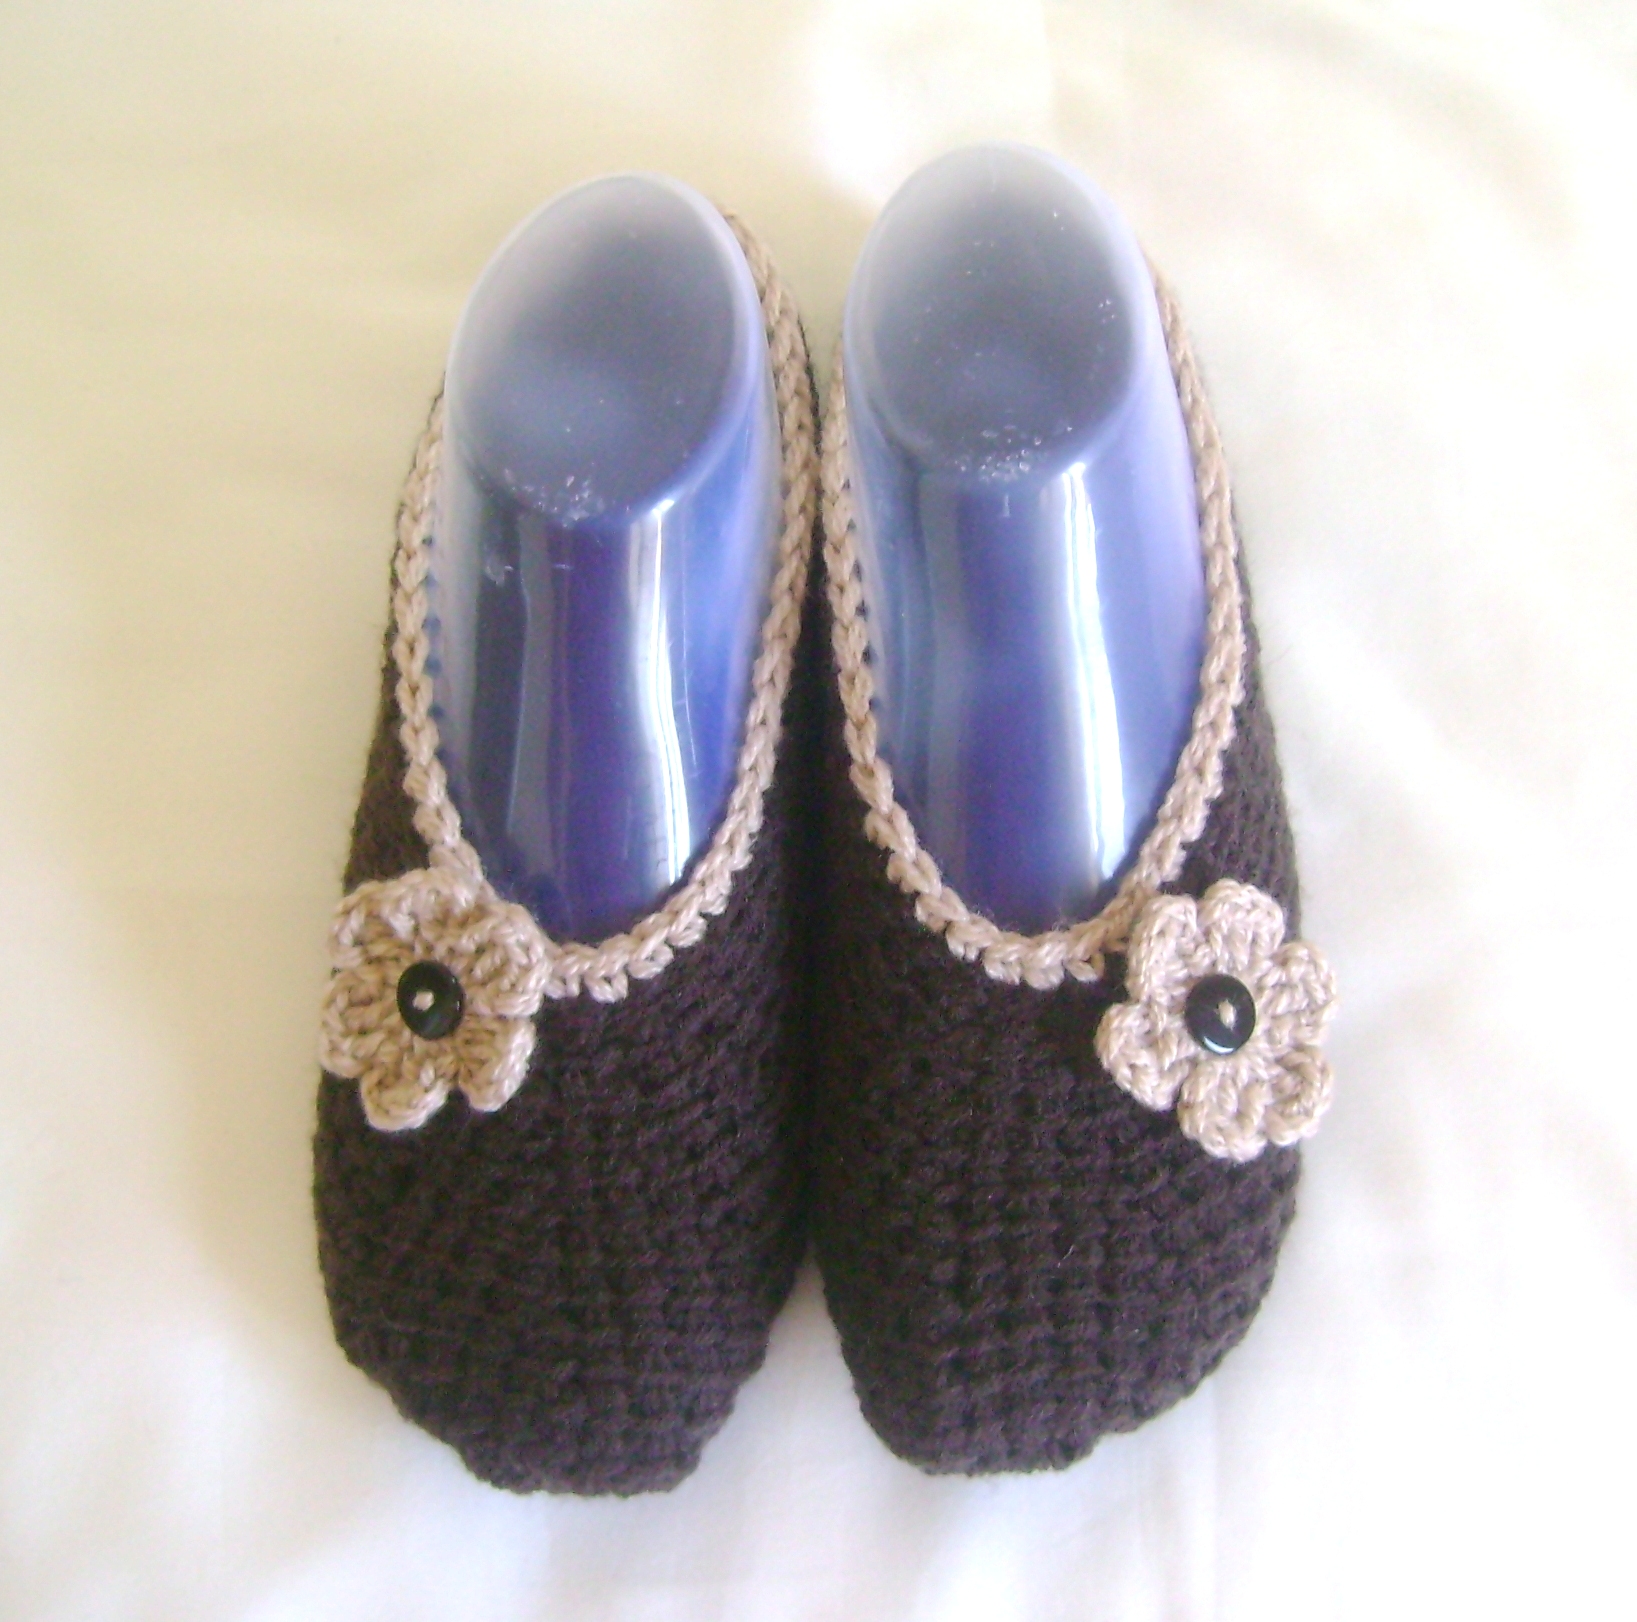 Brown Cream Wool Slippers Crochet Slippers Woman Slippers Home Shoes ...